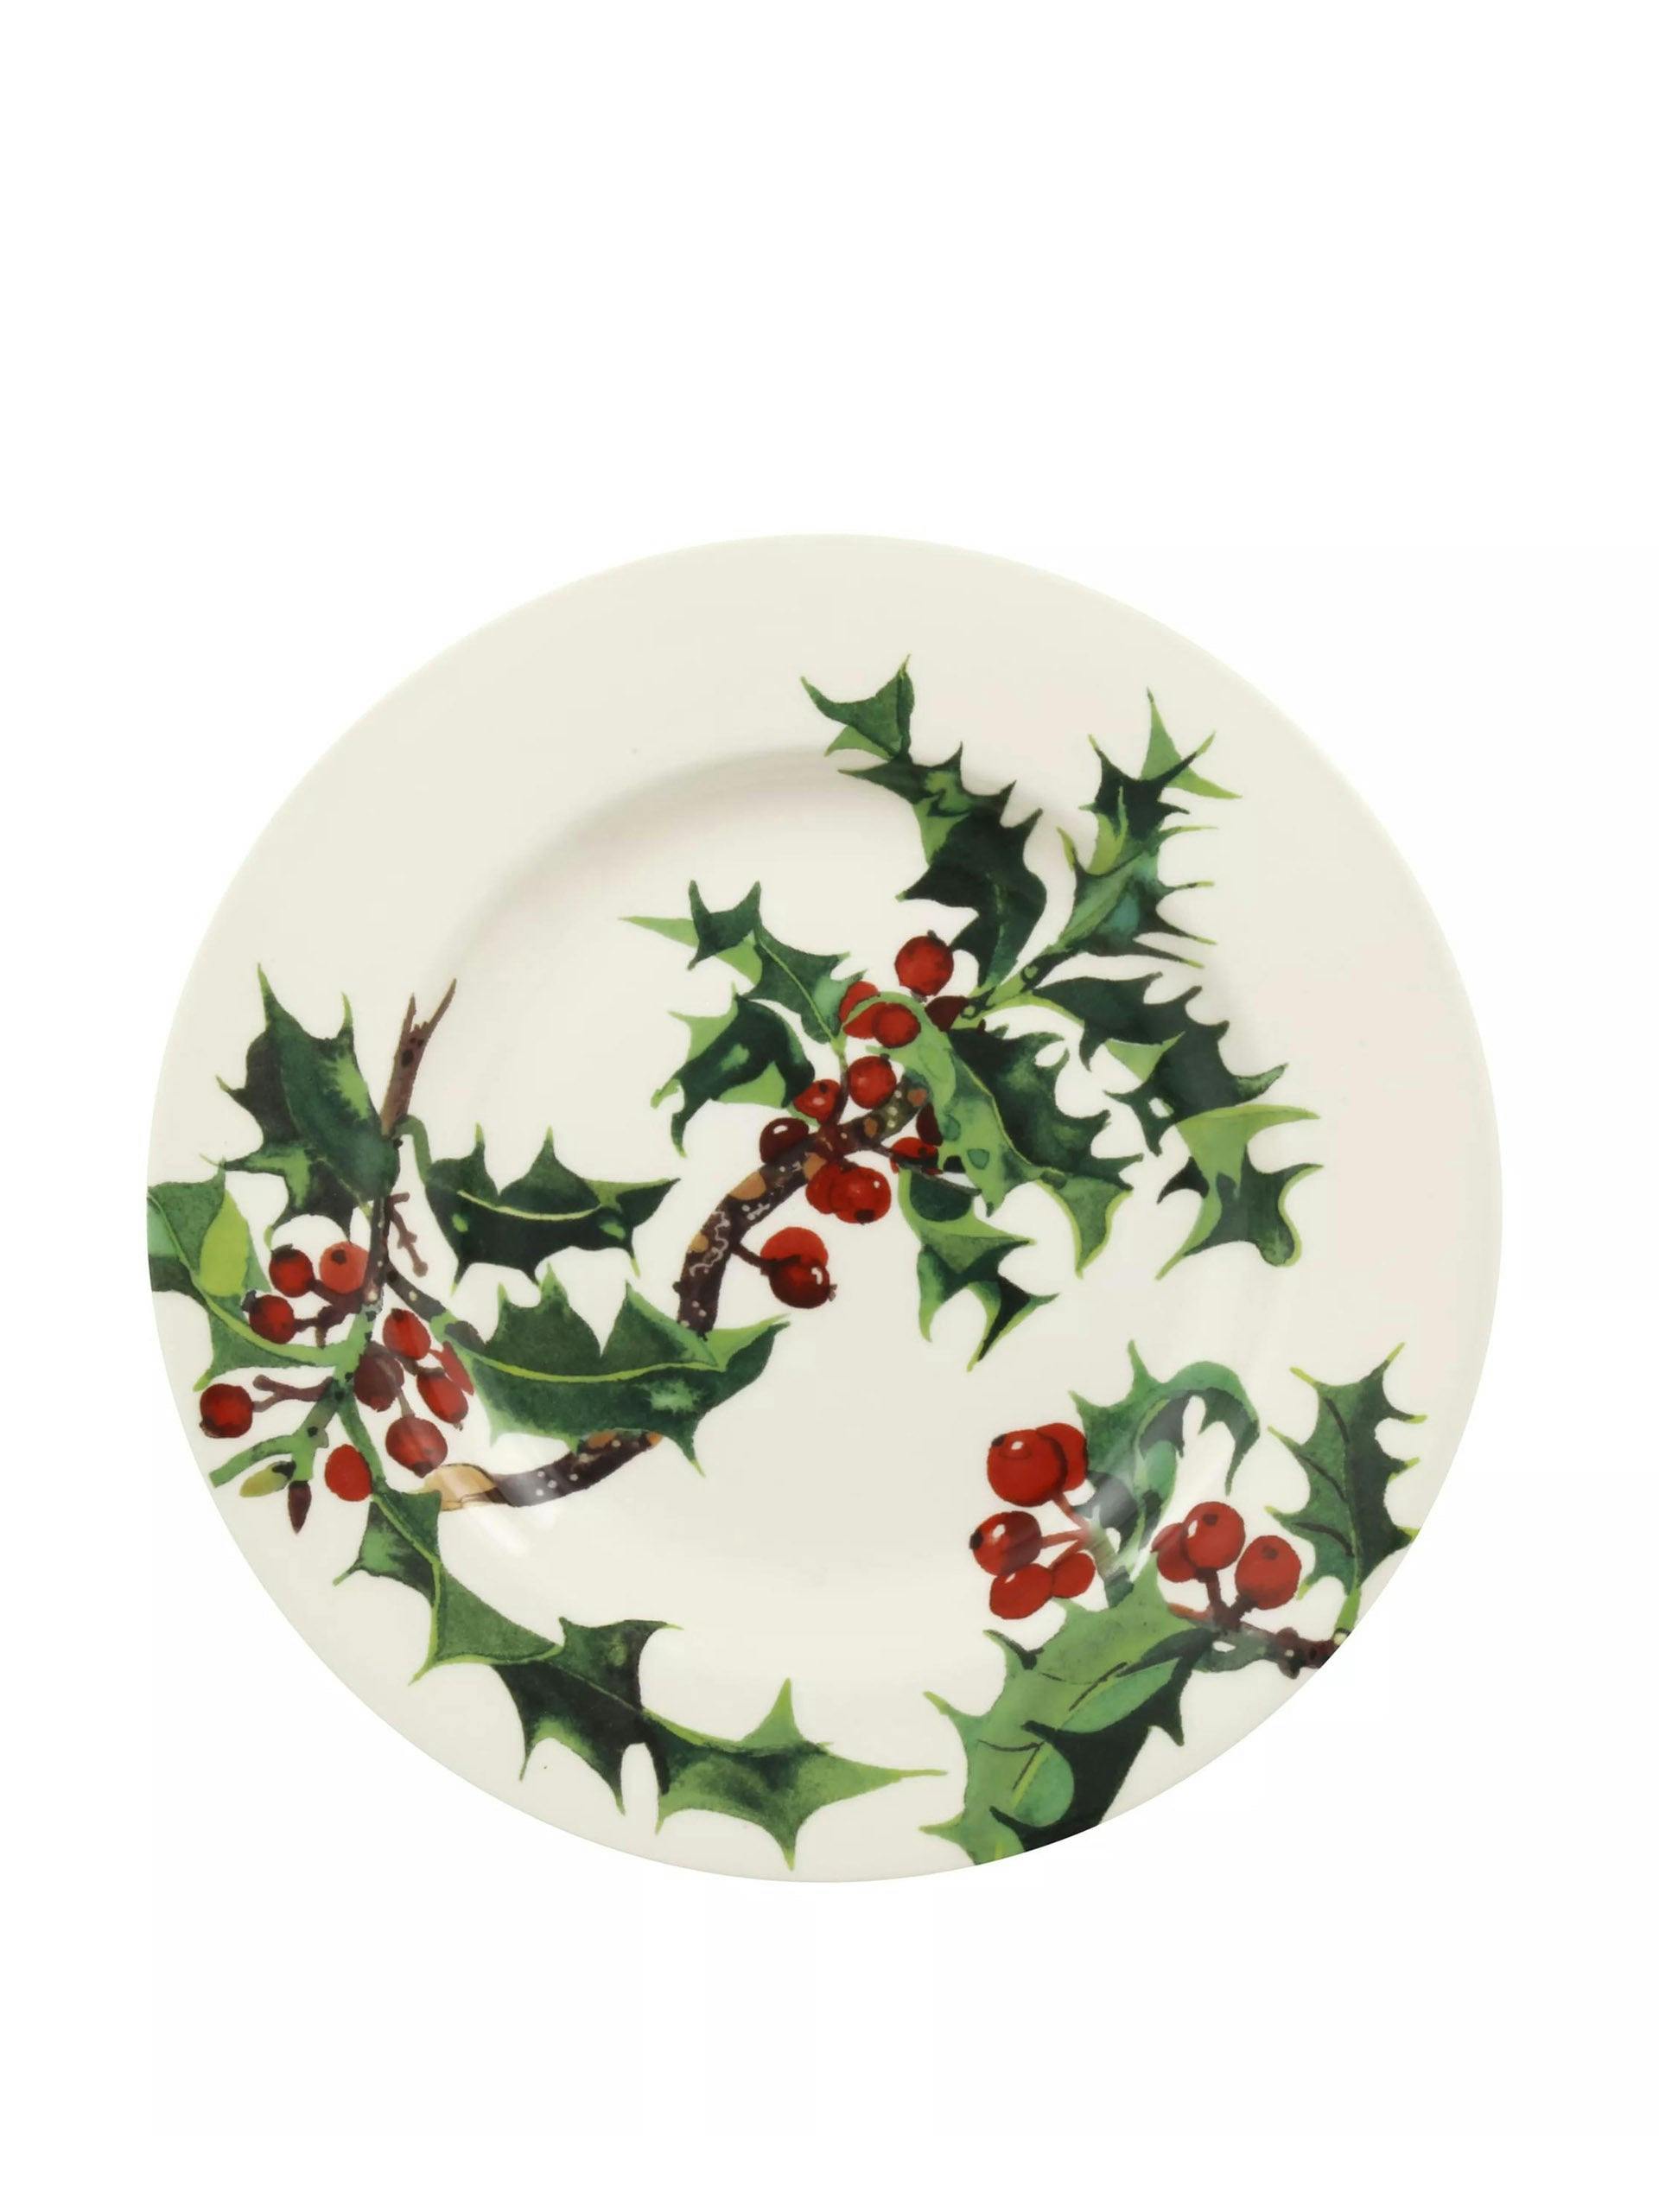 Holly plate